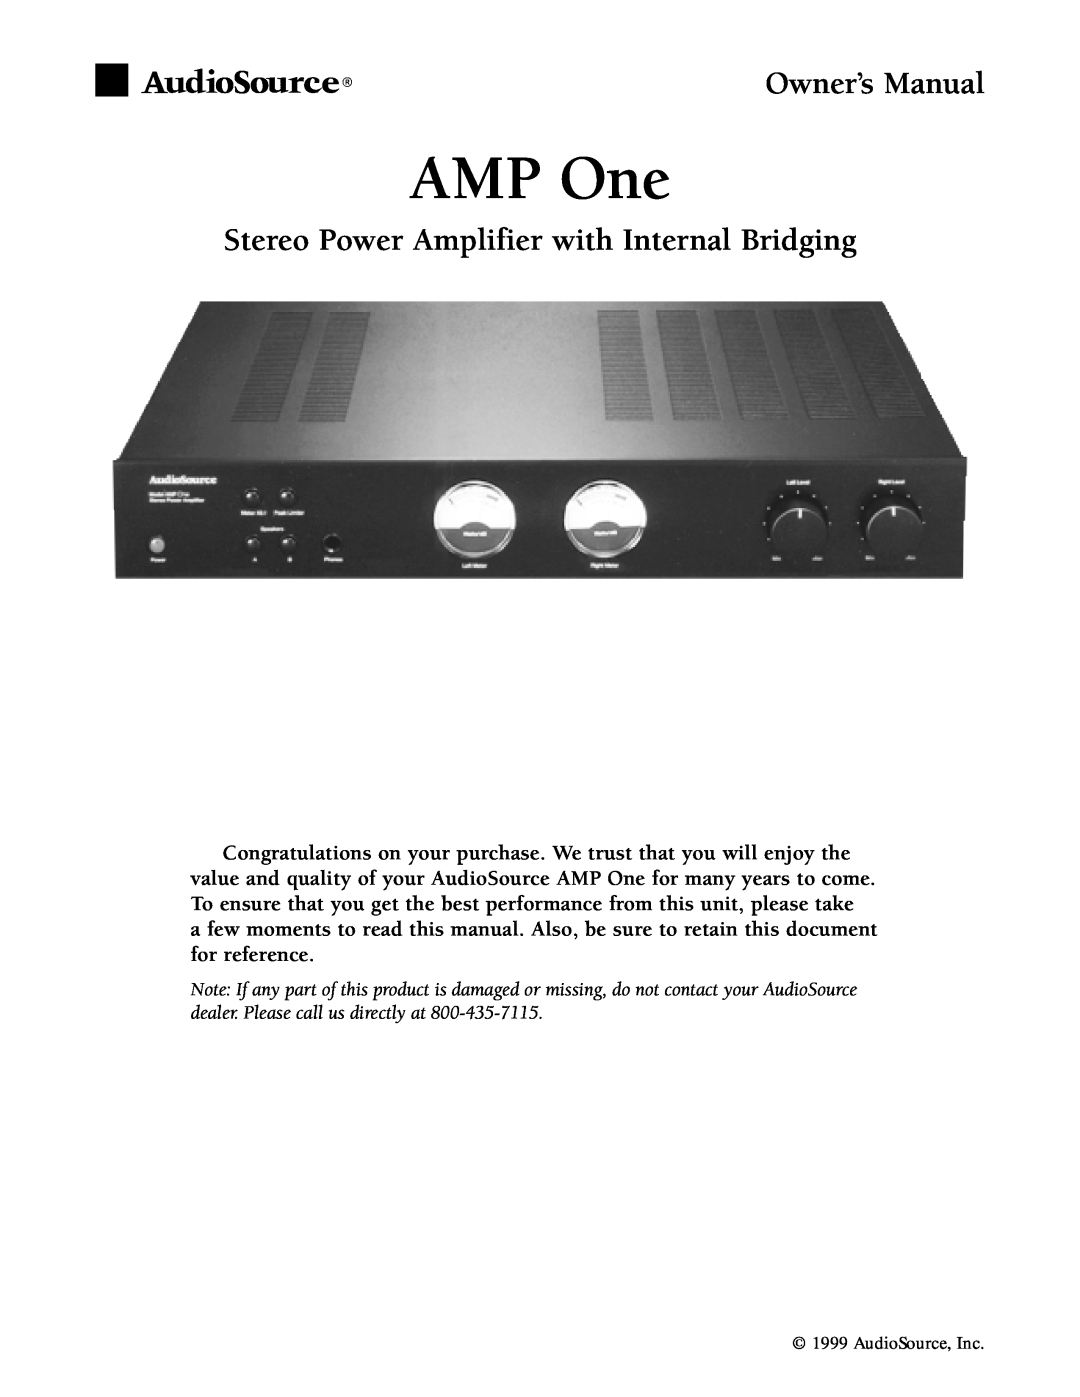 AudioSource PROJECTONE owner manual AMP One, Stereo Power Amplifier with Internal Bridging 